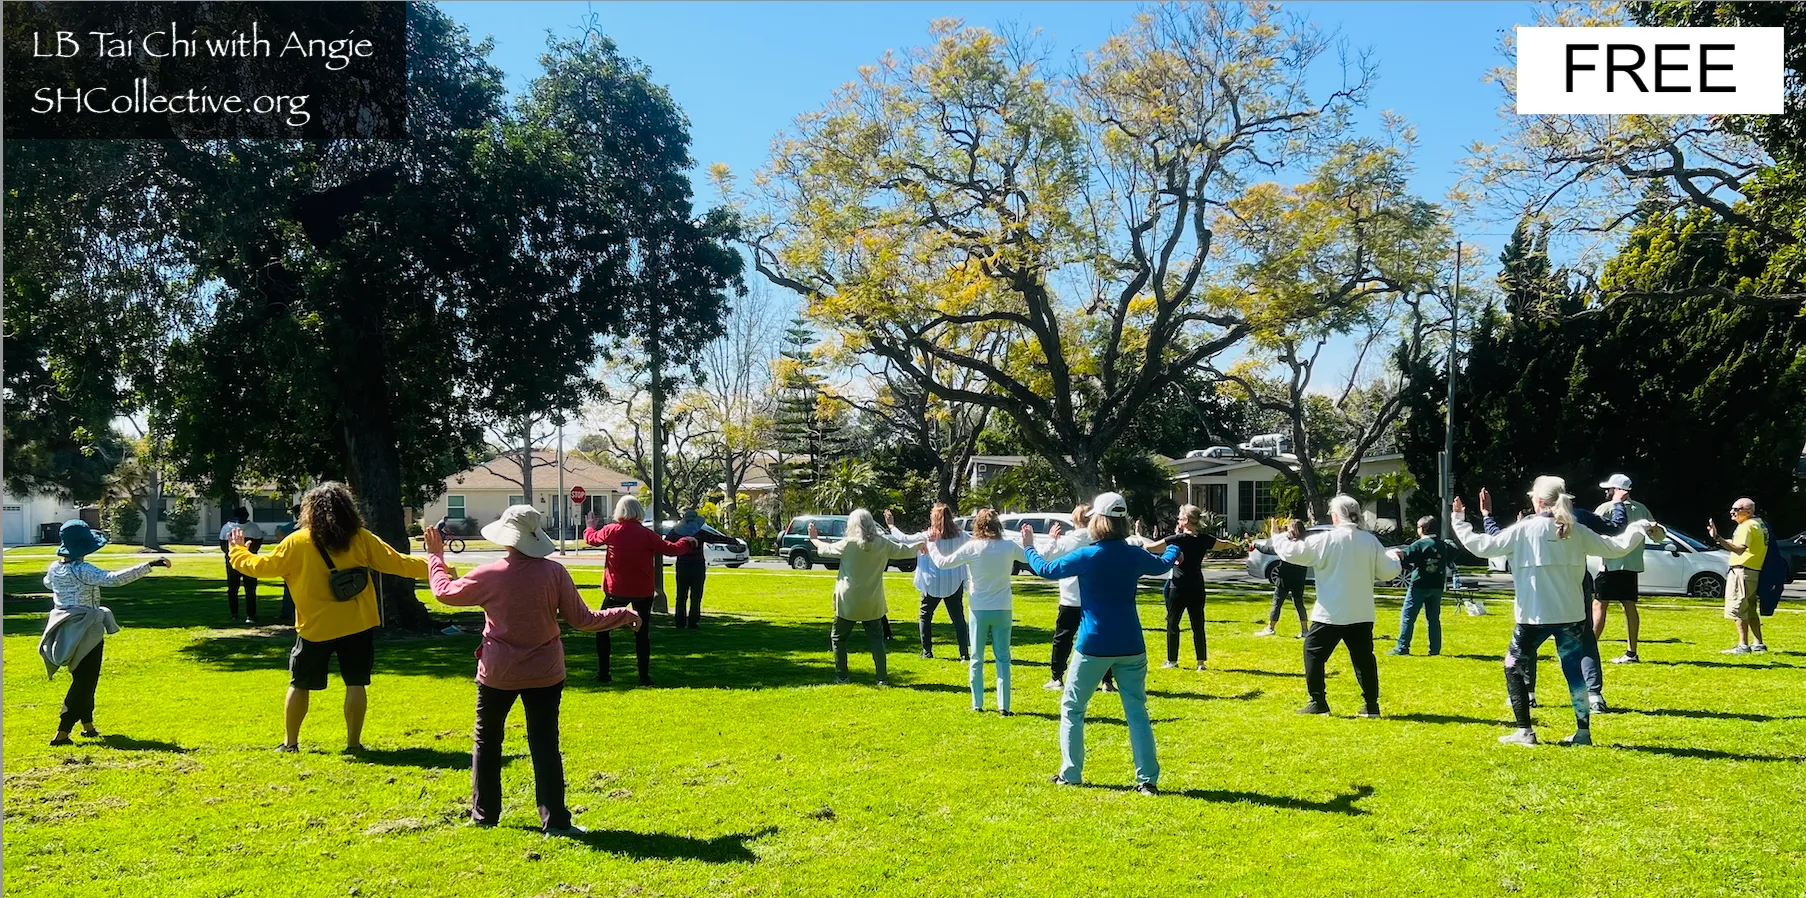 tai chi long beach for beginners class posing a movement at the park